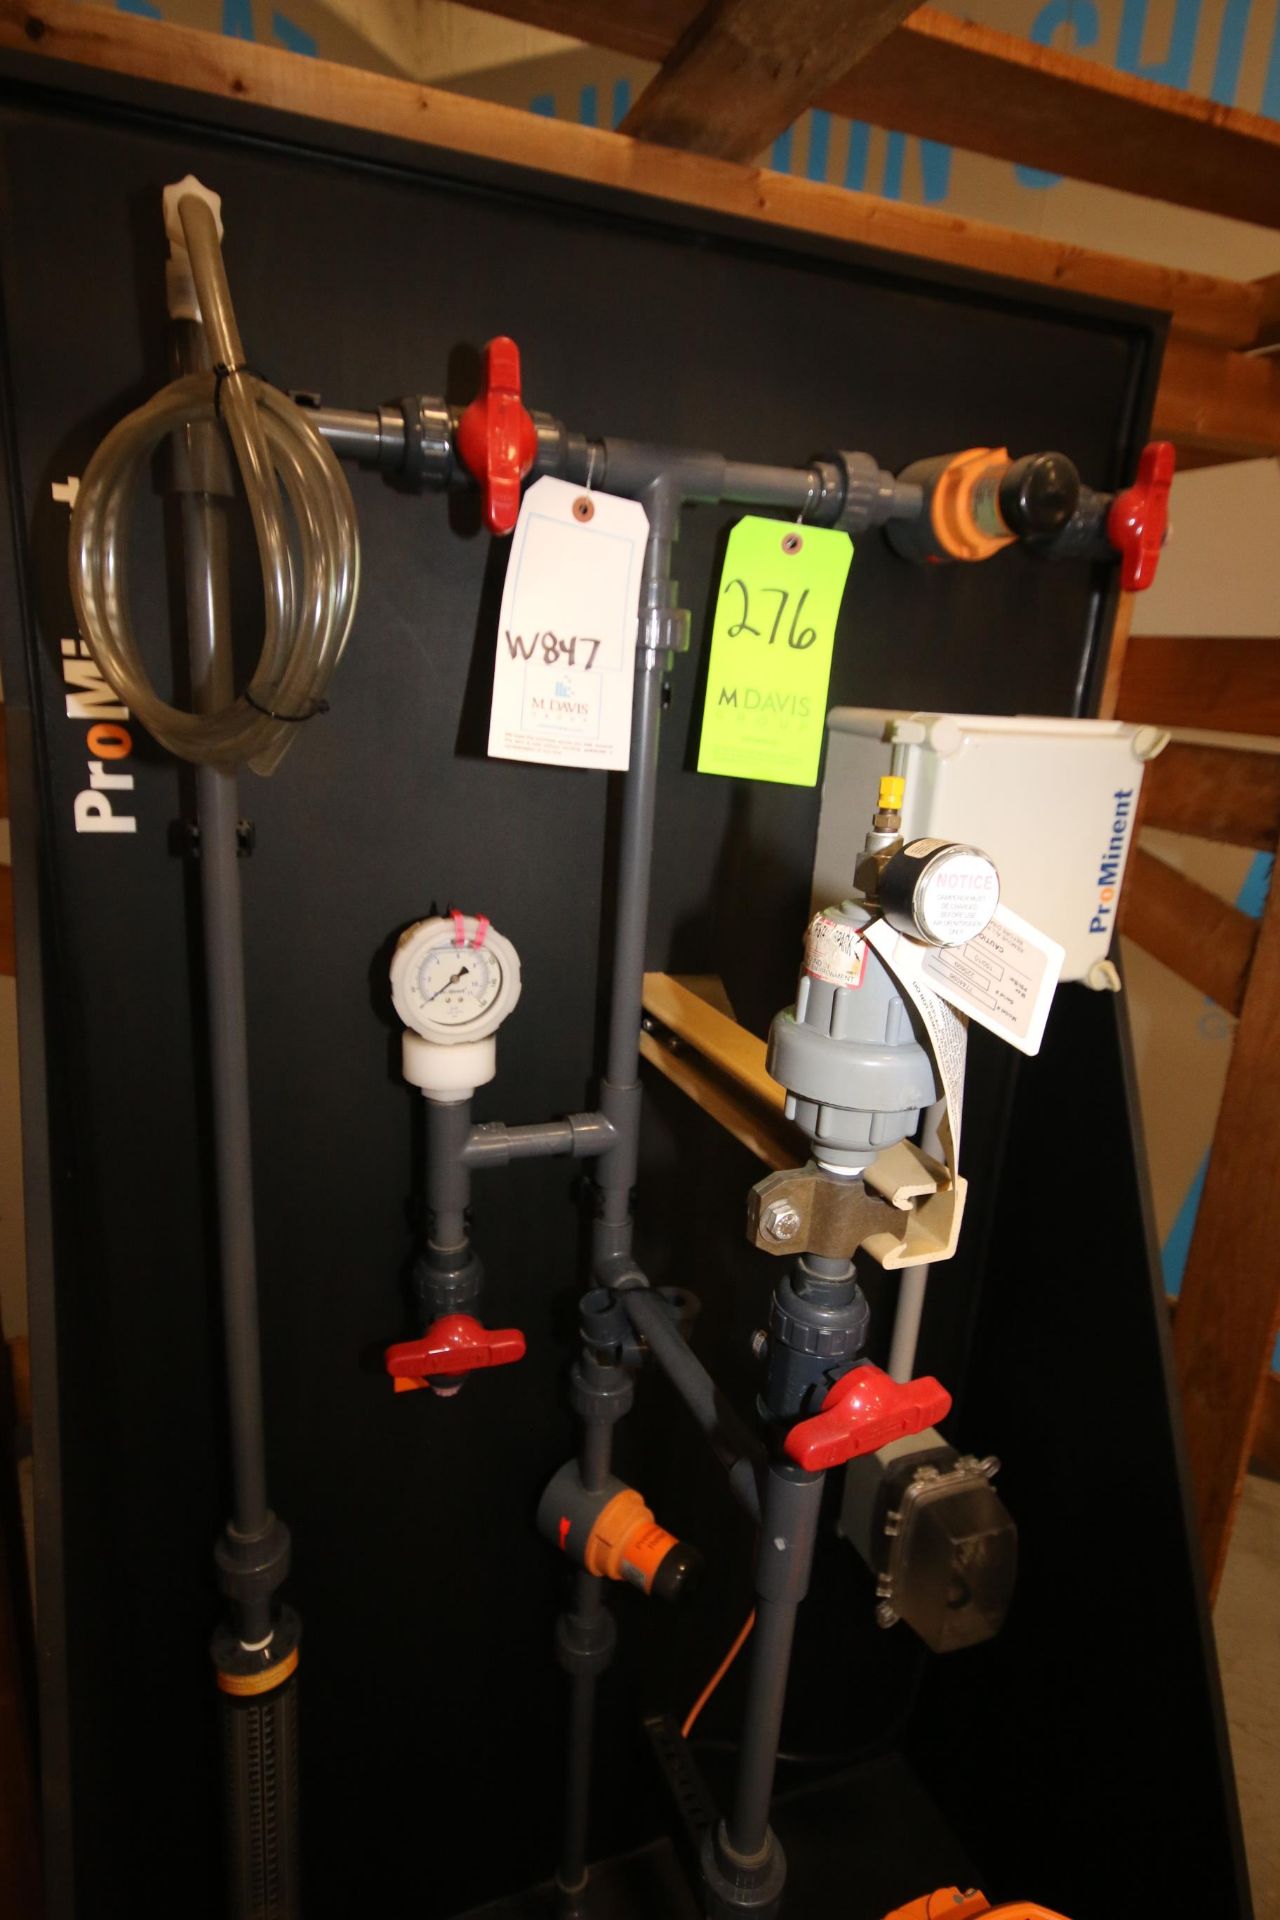 New Pro Minent Chemical Monitoring System, Includes a Sigma Chemical Pump with Valves, Manifold - Image 4 of 6